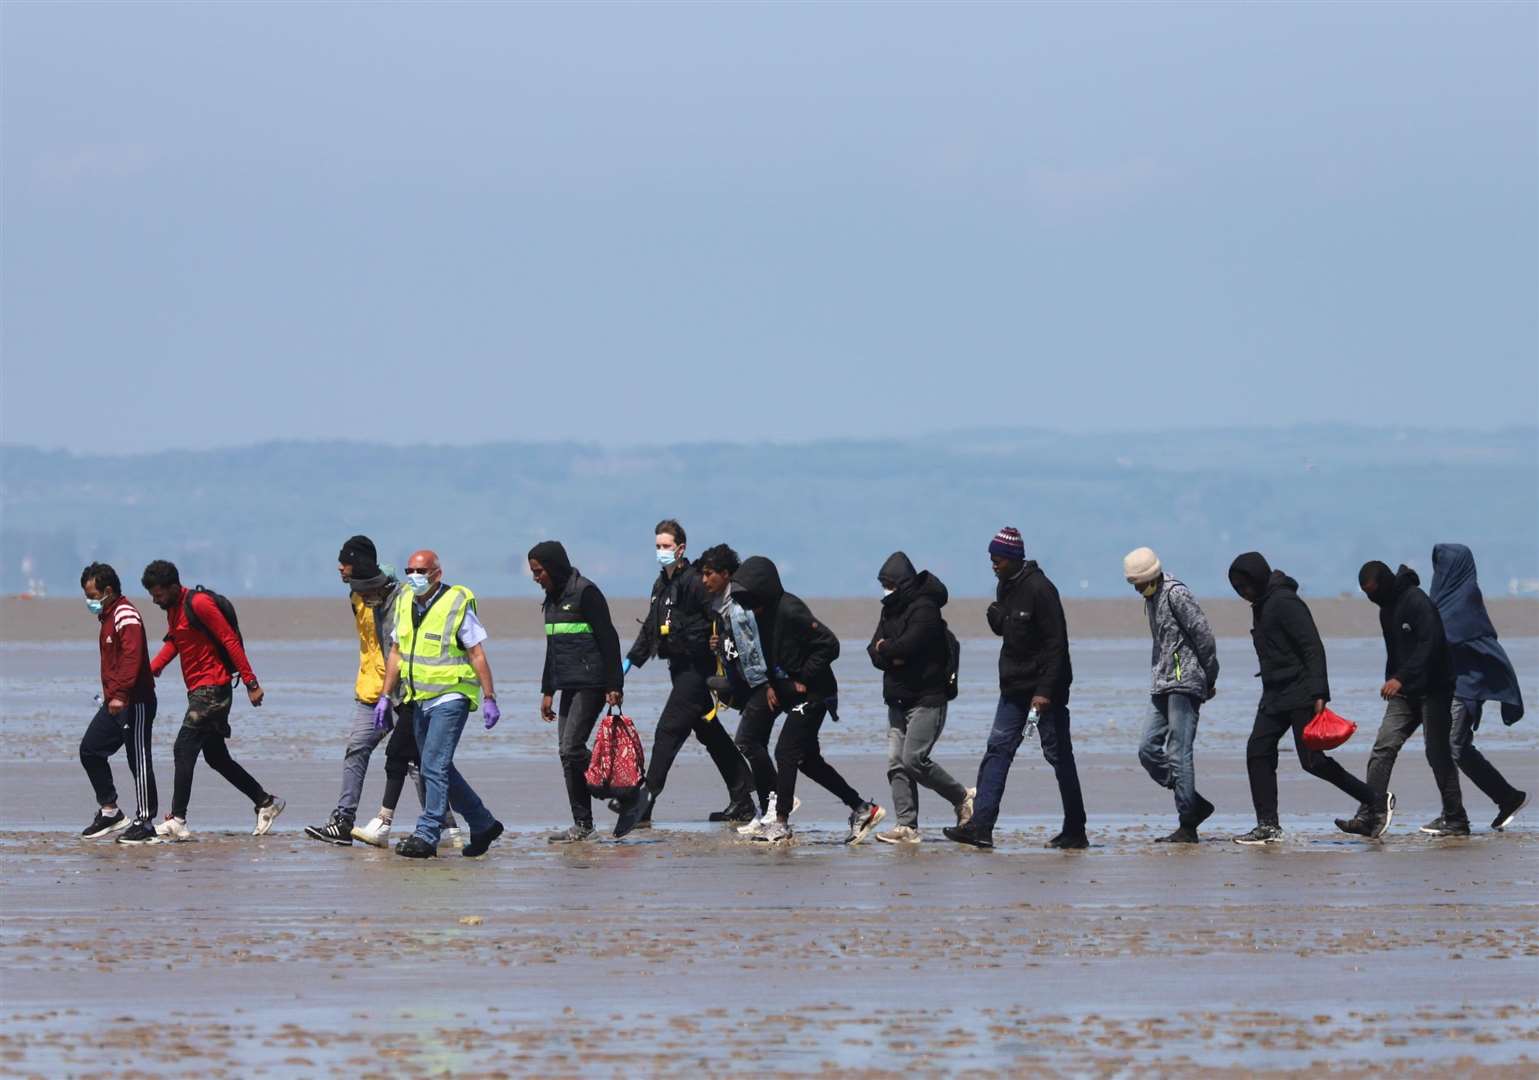 12 asylum seekers with two officials at Romney Marsh in 2021